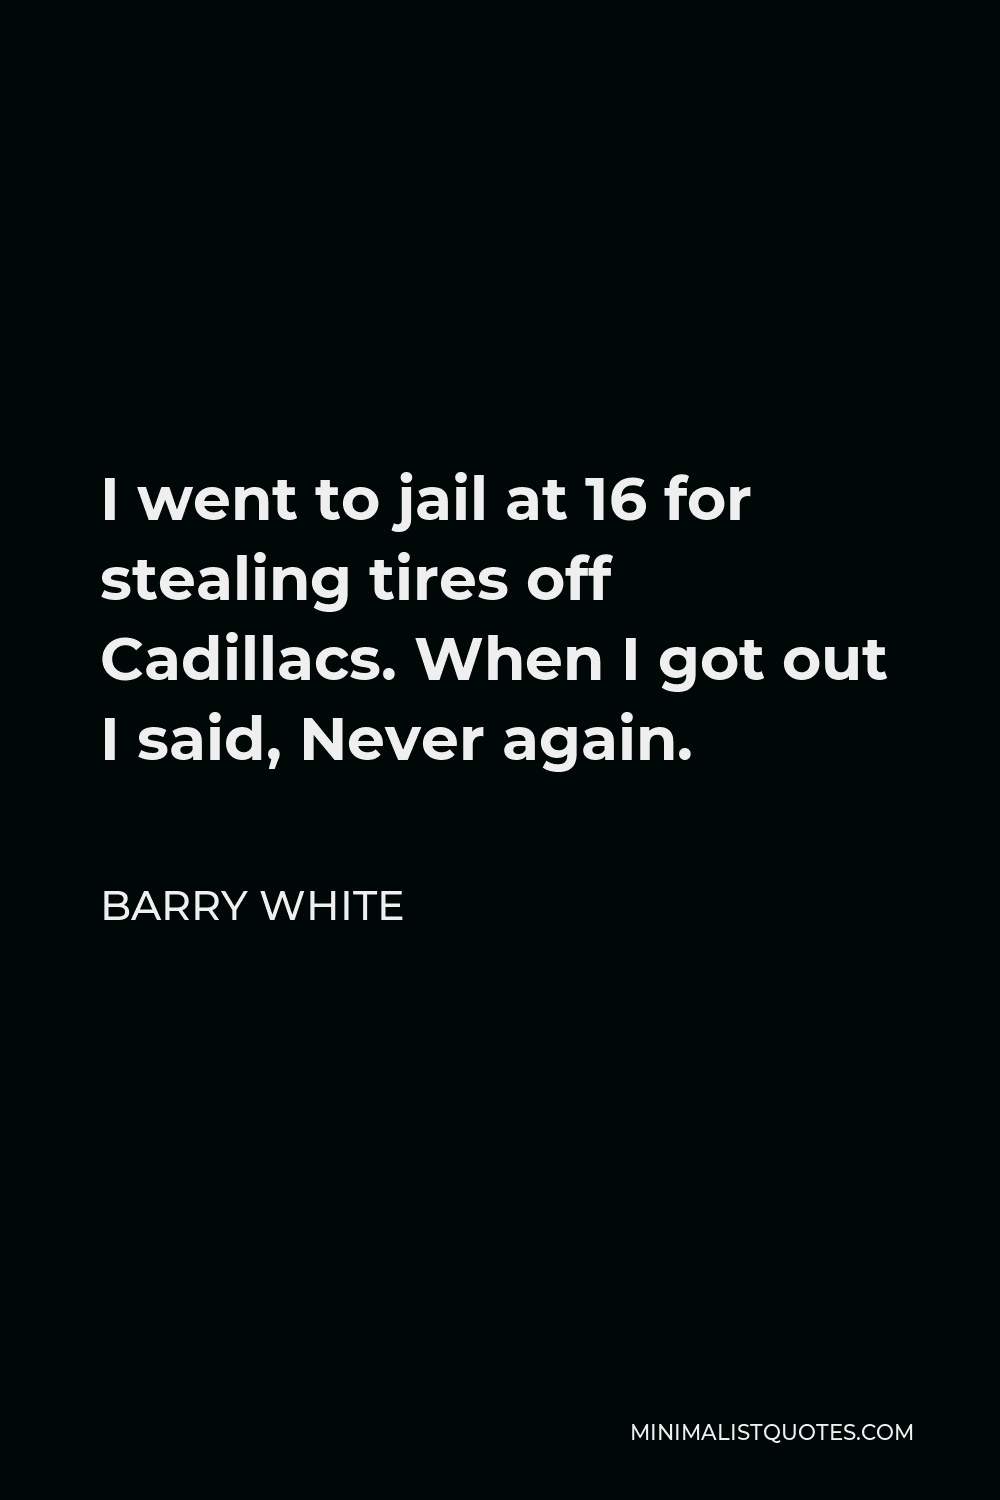 Barry White Quote - I went to jail at 16 for stealing tires off Cadillacs. When I got out I said, Never again.